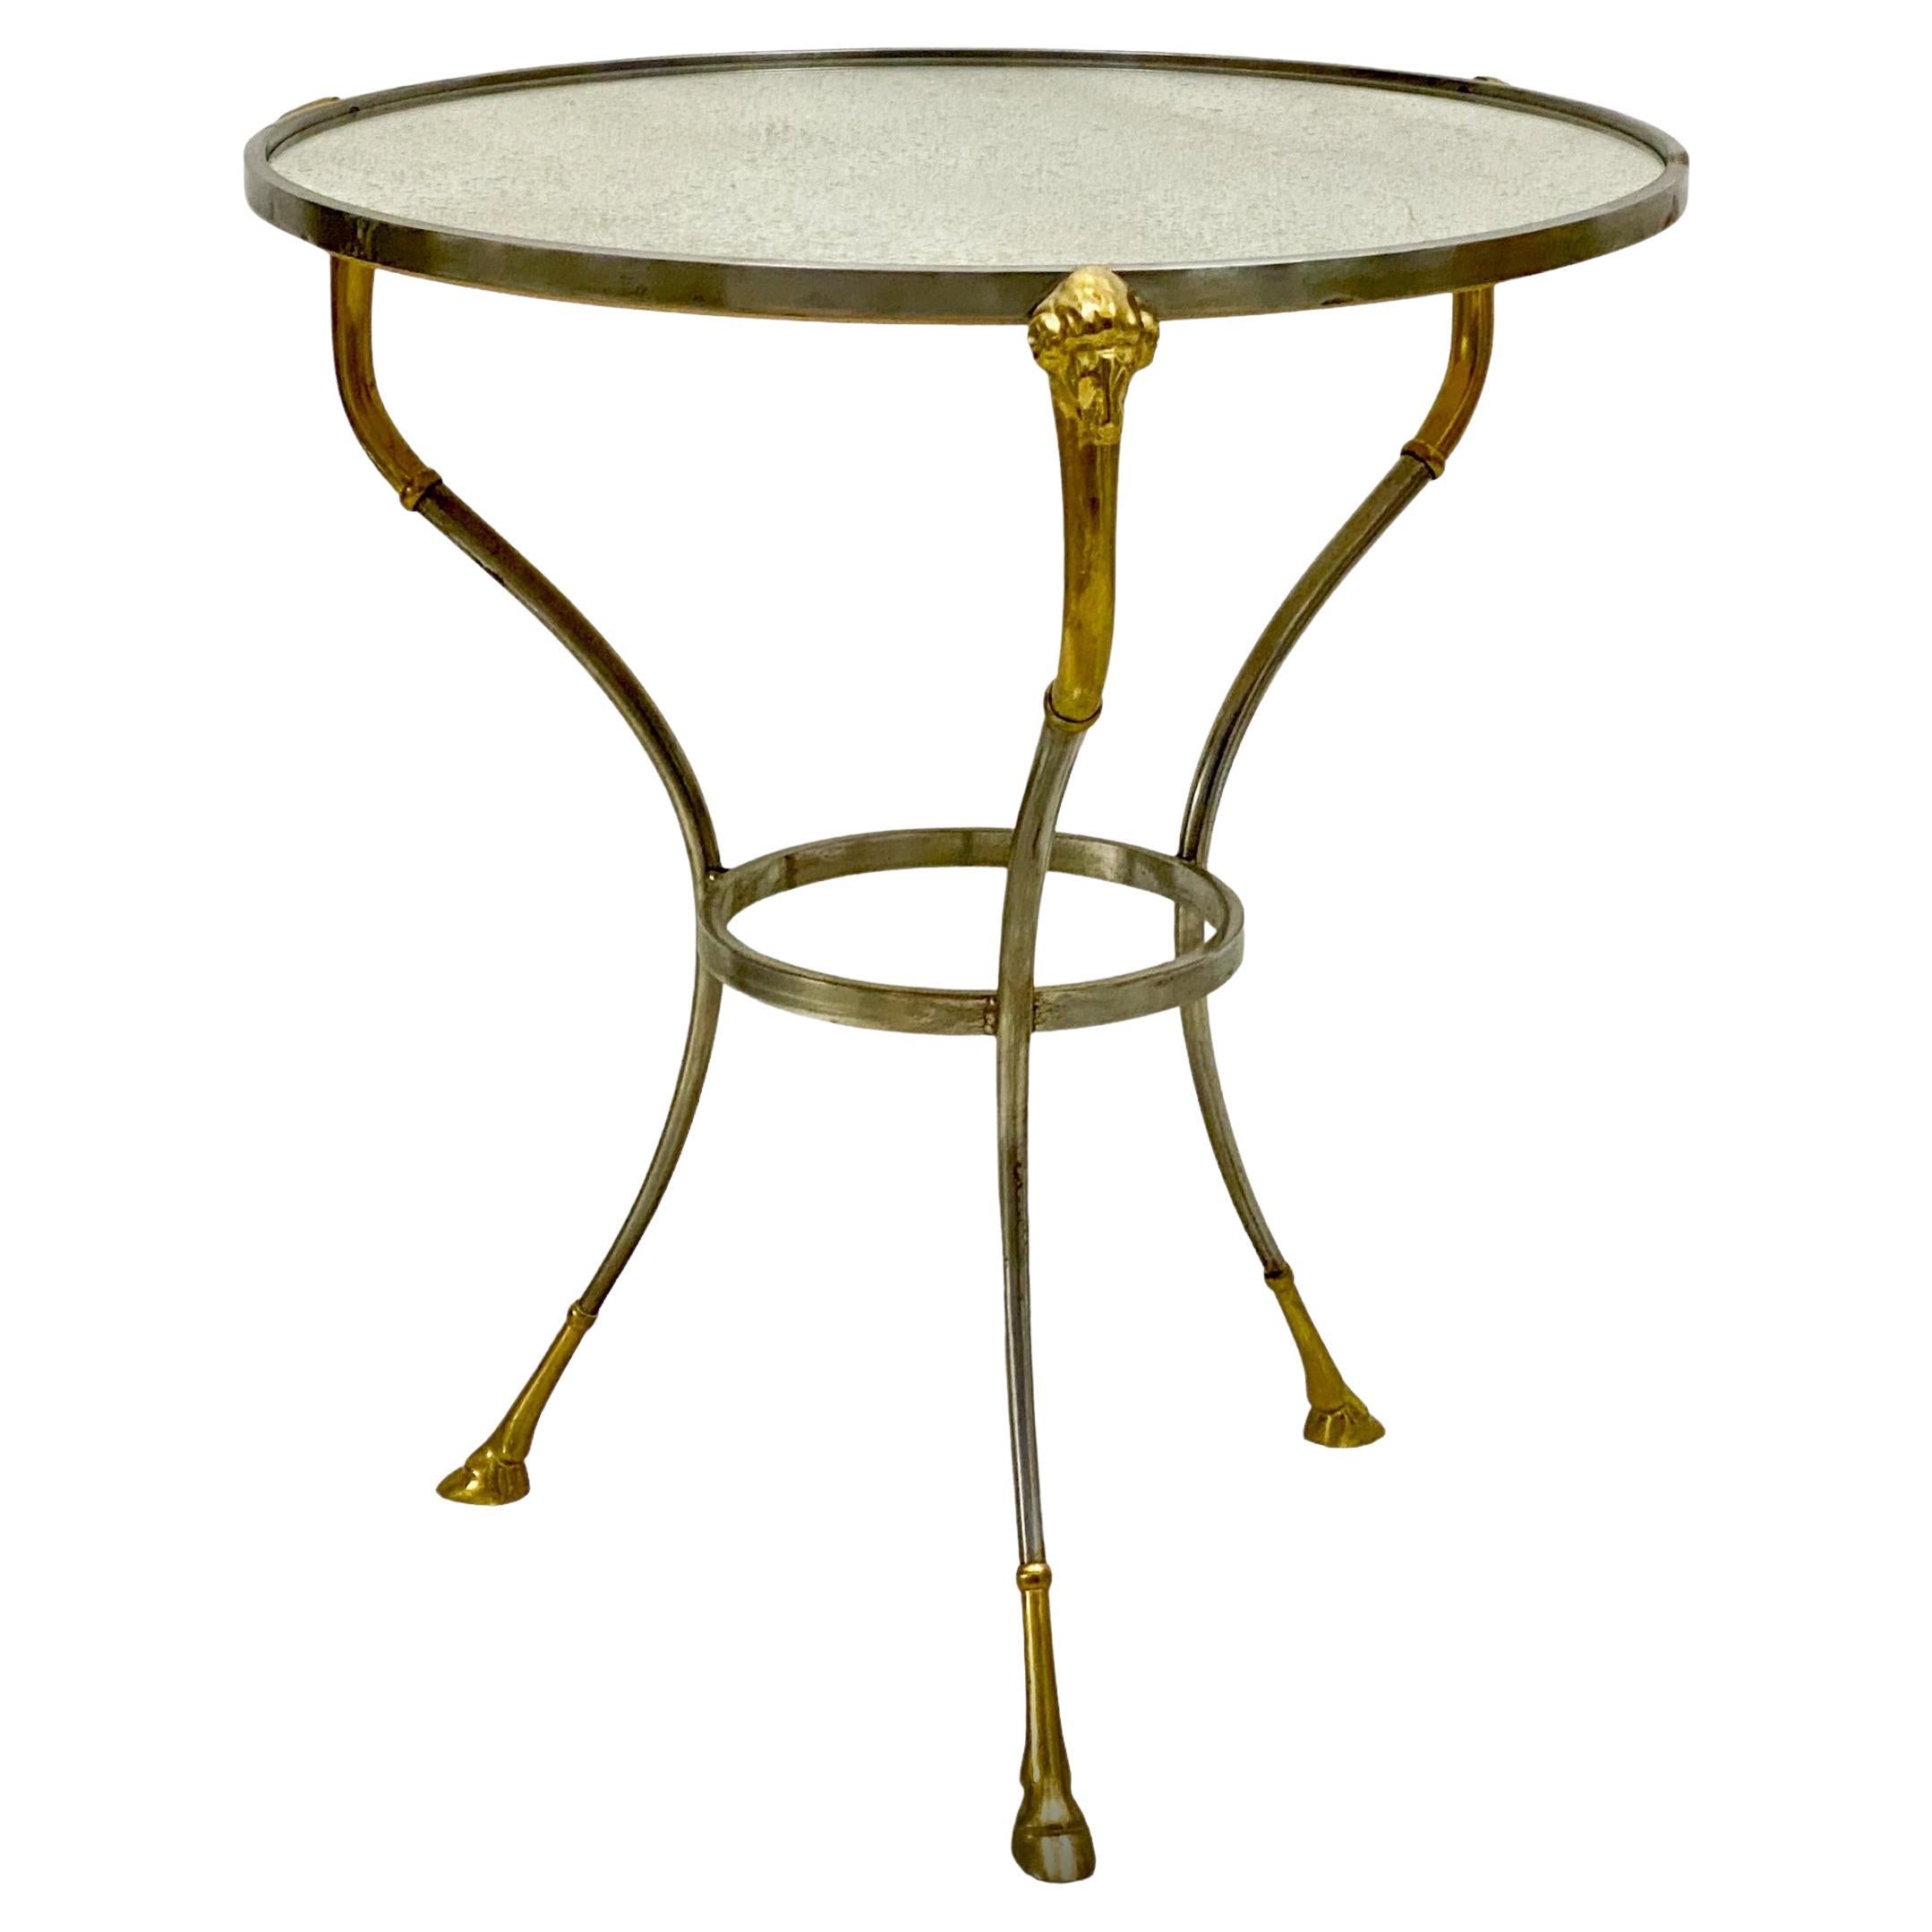 This is a 1970s Italian Maison Jansen inspired gueridon with a distressed mirrored top. The frame is steel with brass rams and hooves. It is in very good condition.